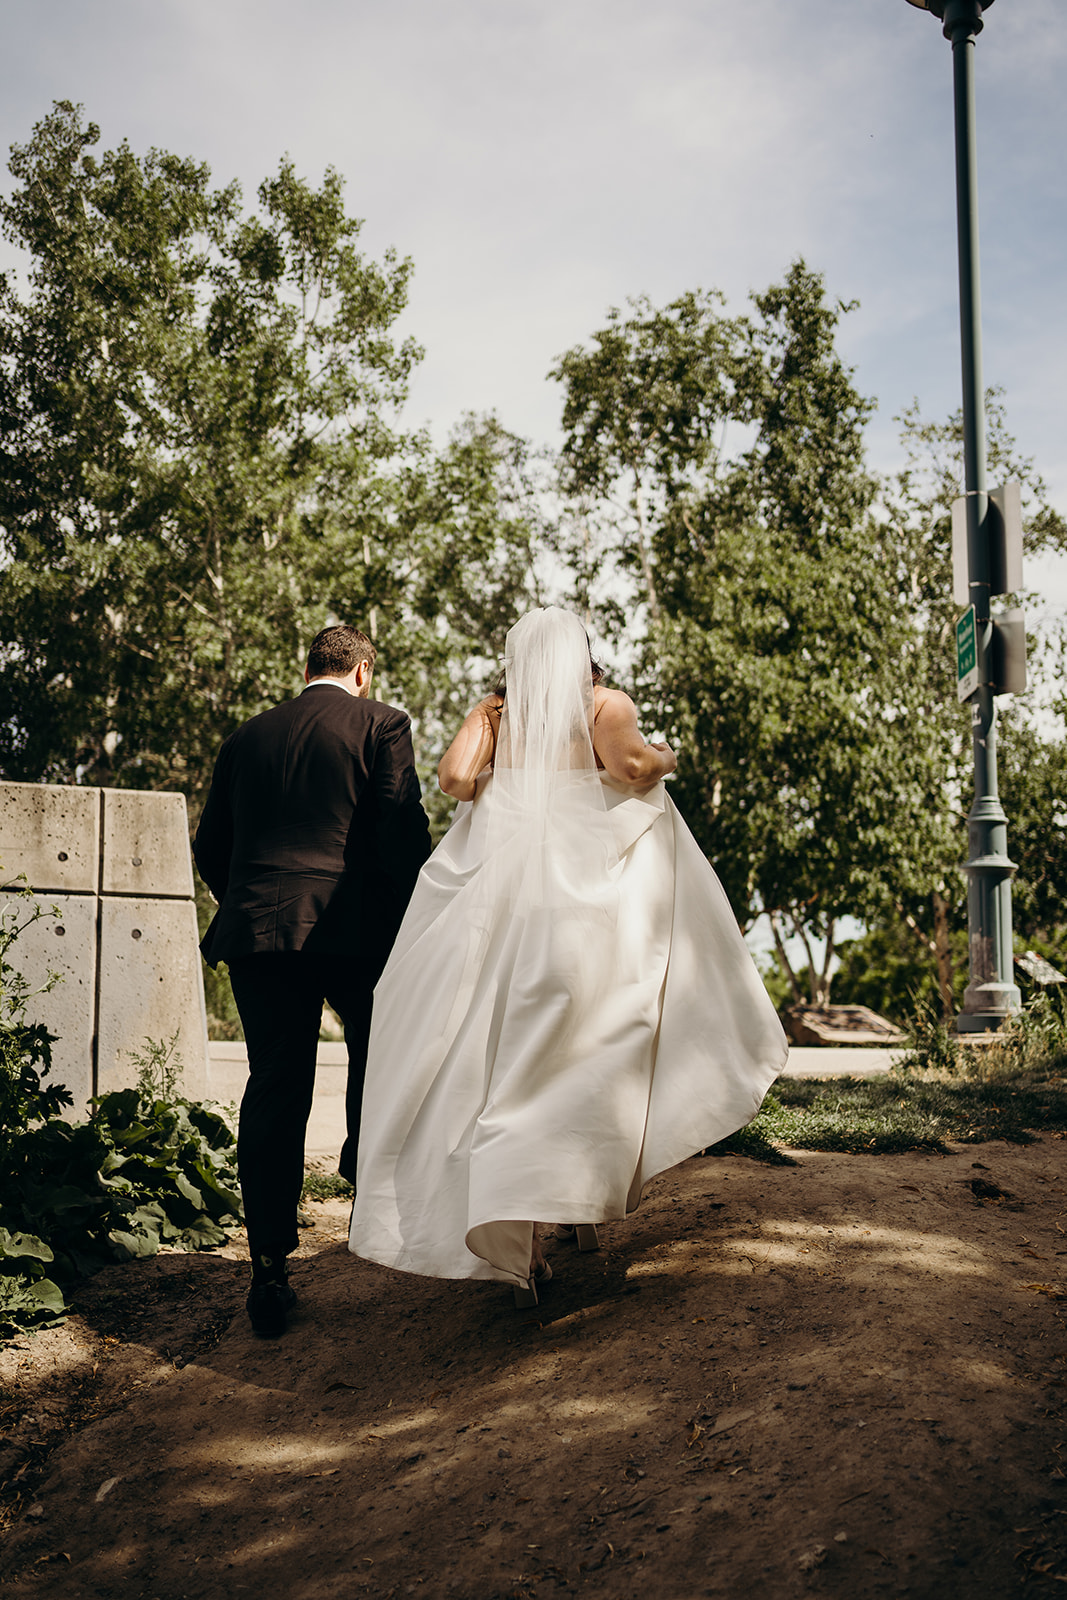 Husband and wife walking up a hill while the wife holds her dress.